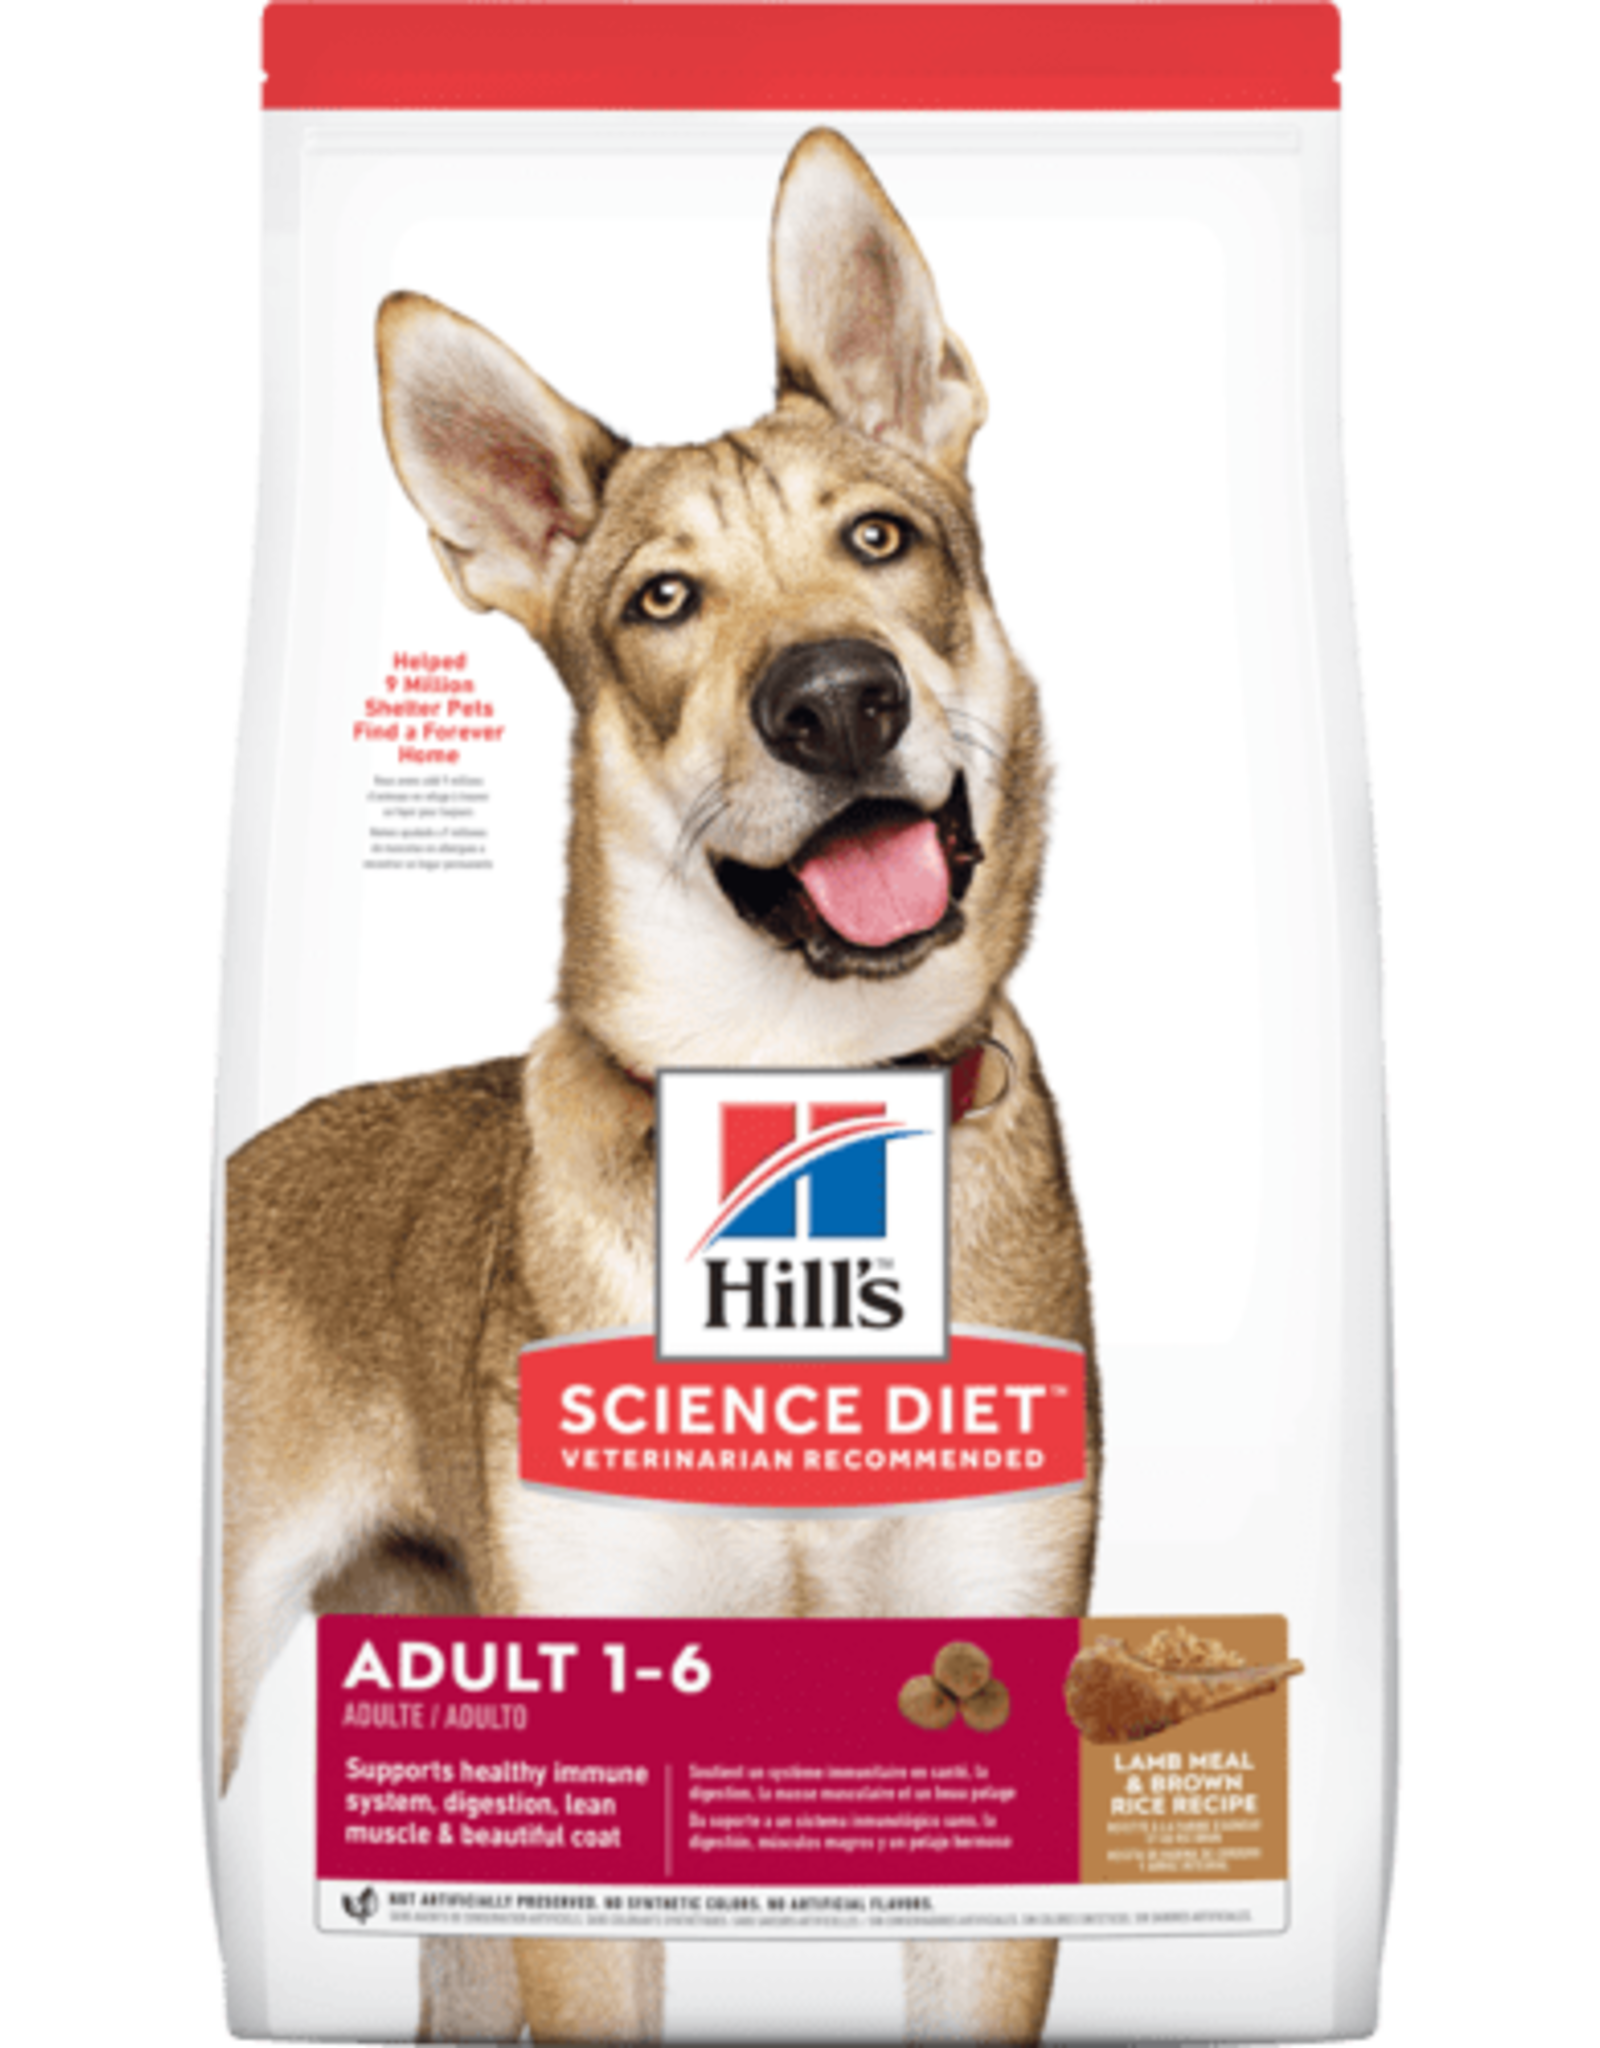 SCIENCE DIET HILL'S SCIENCE DIET CANINE ADULT LAMB & RICE 15.5LBS